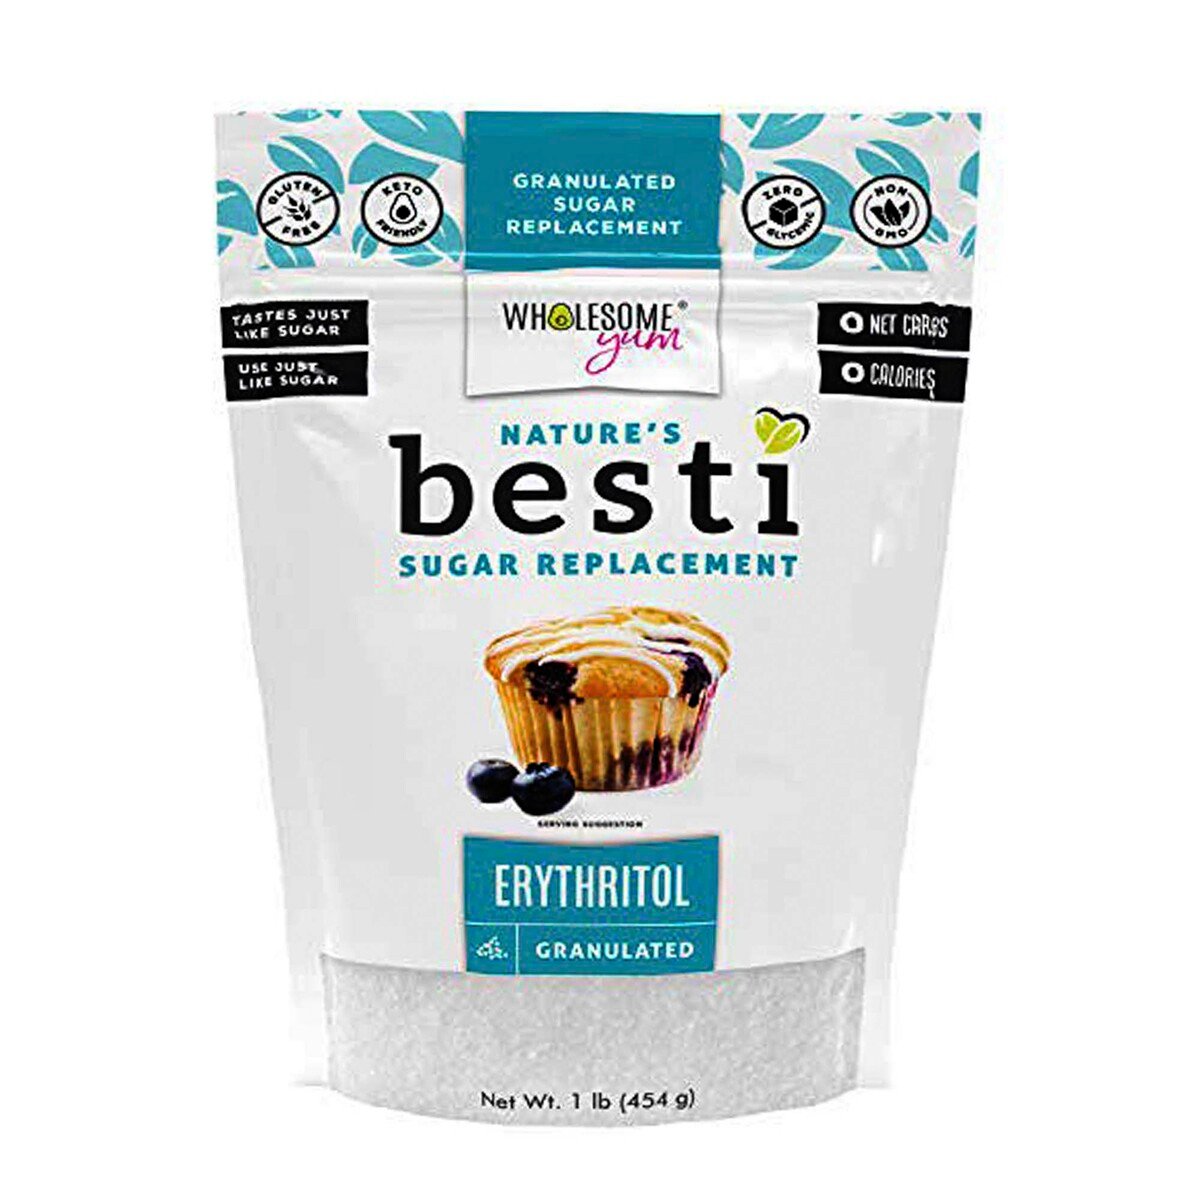 Wholesome Yum Nature's Besti Sugar Replacement Erythritol Granulated 454g